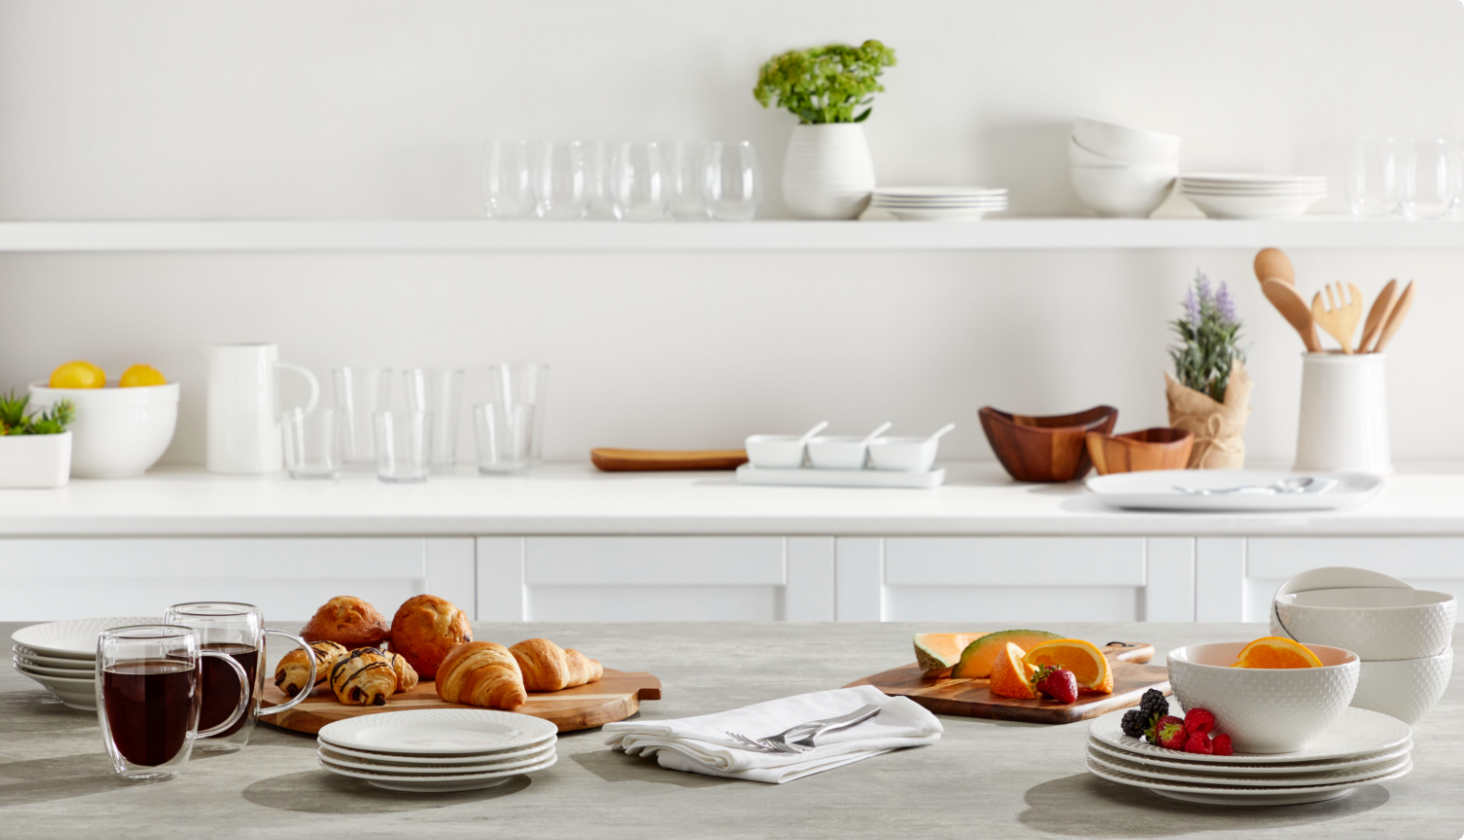 White kitchen with white serving dishes, glasses, and breakfast foods